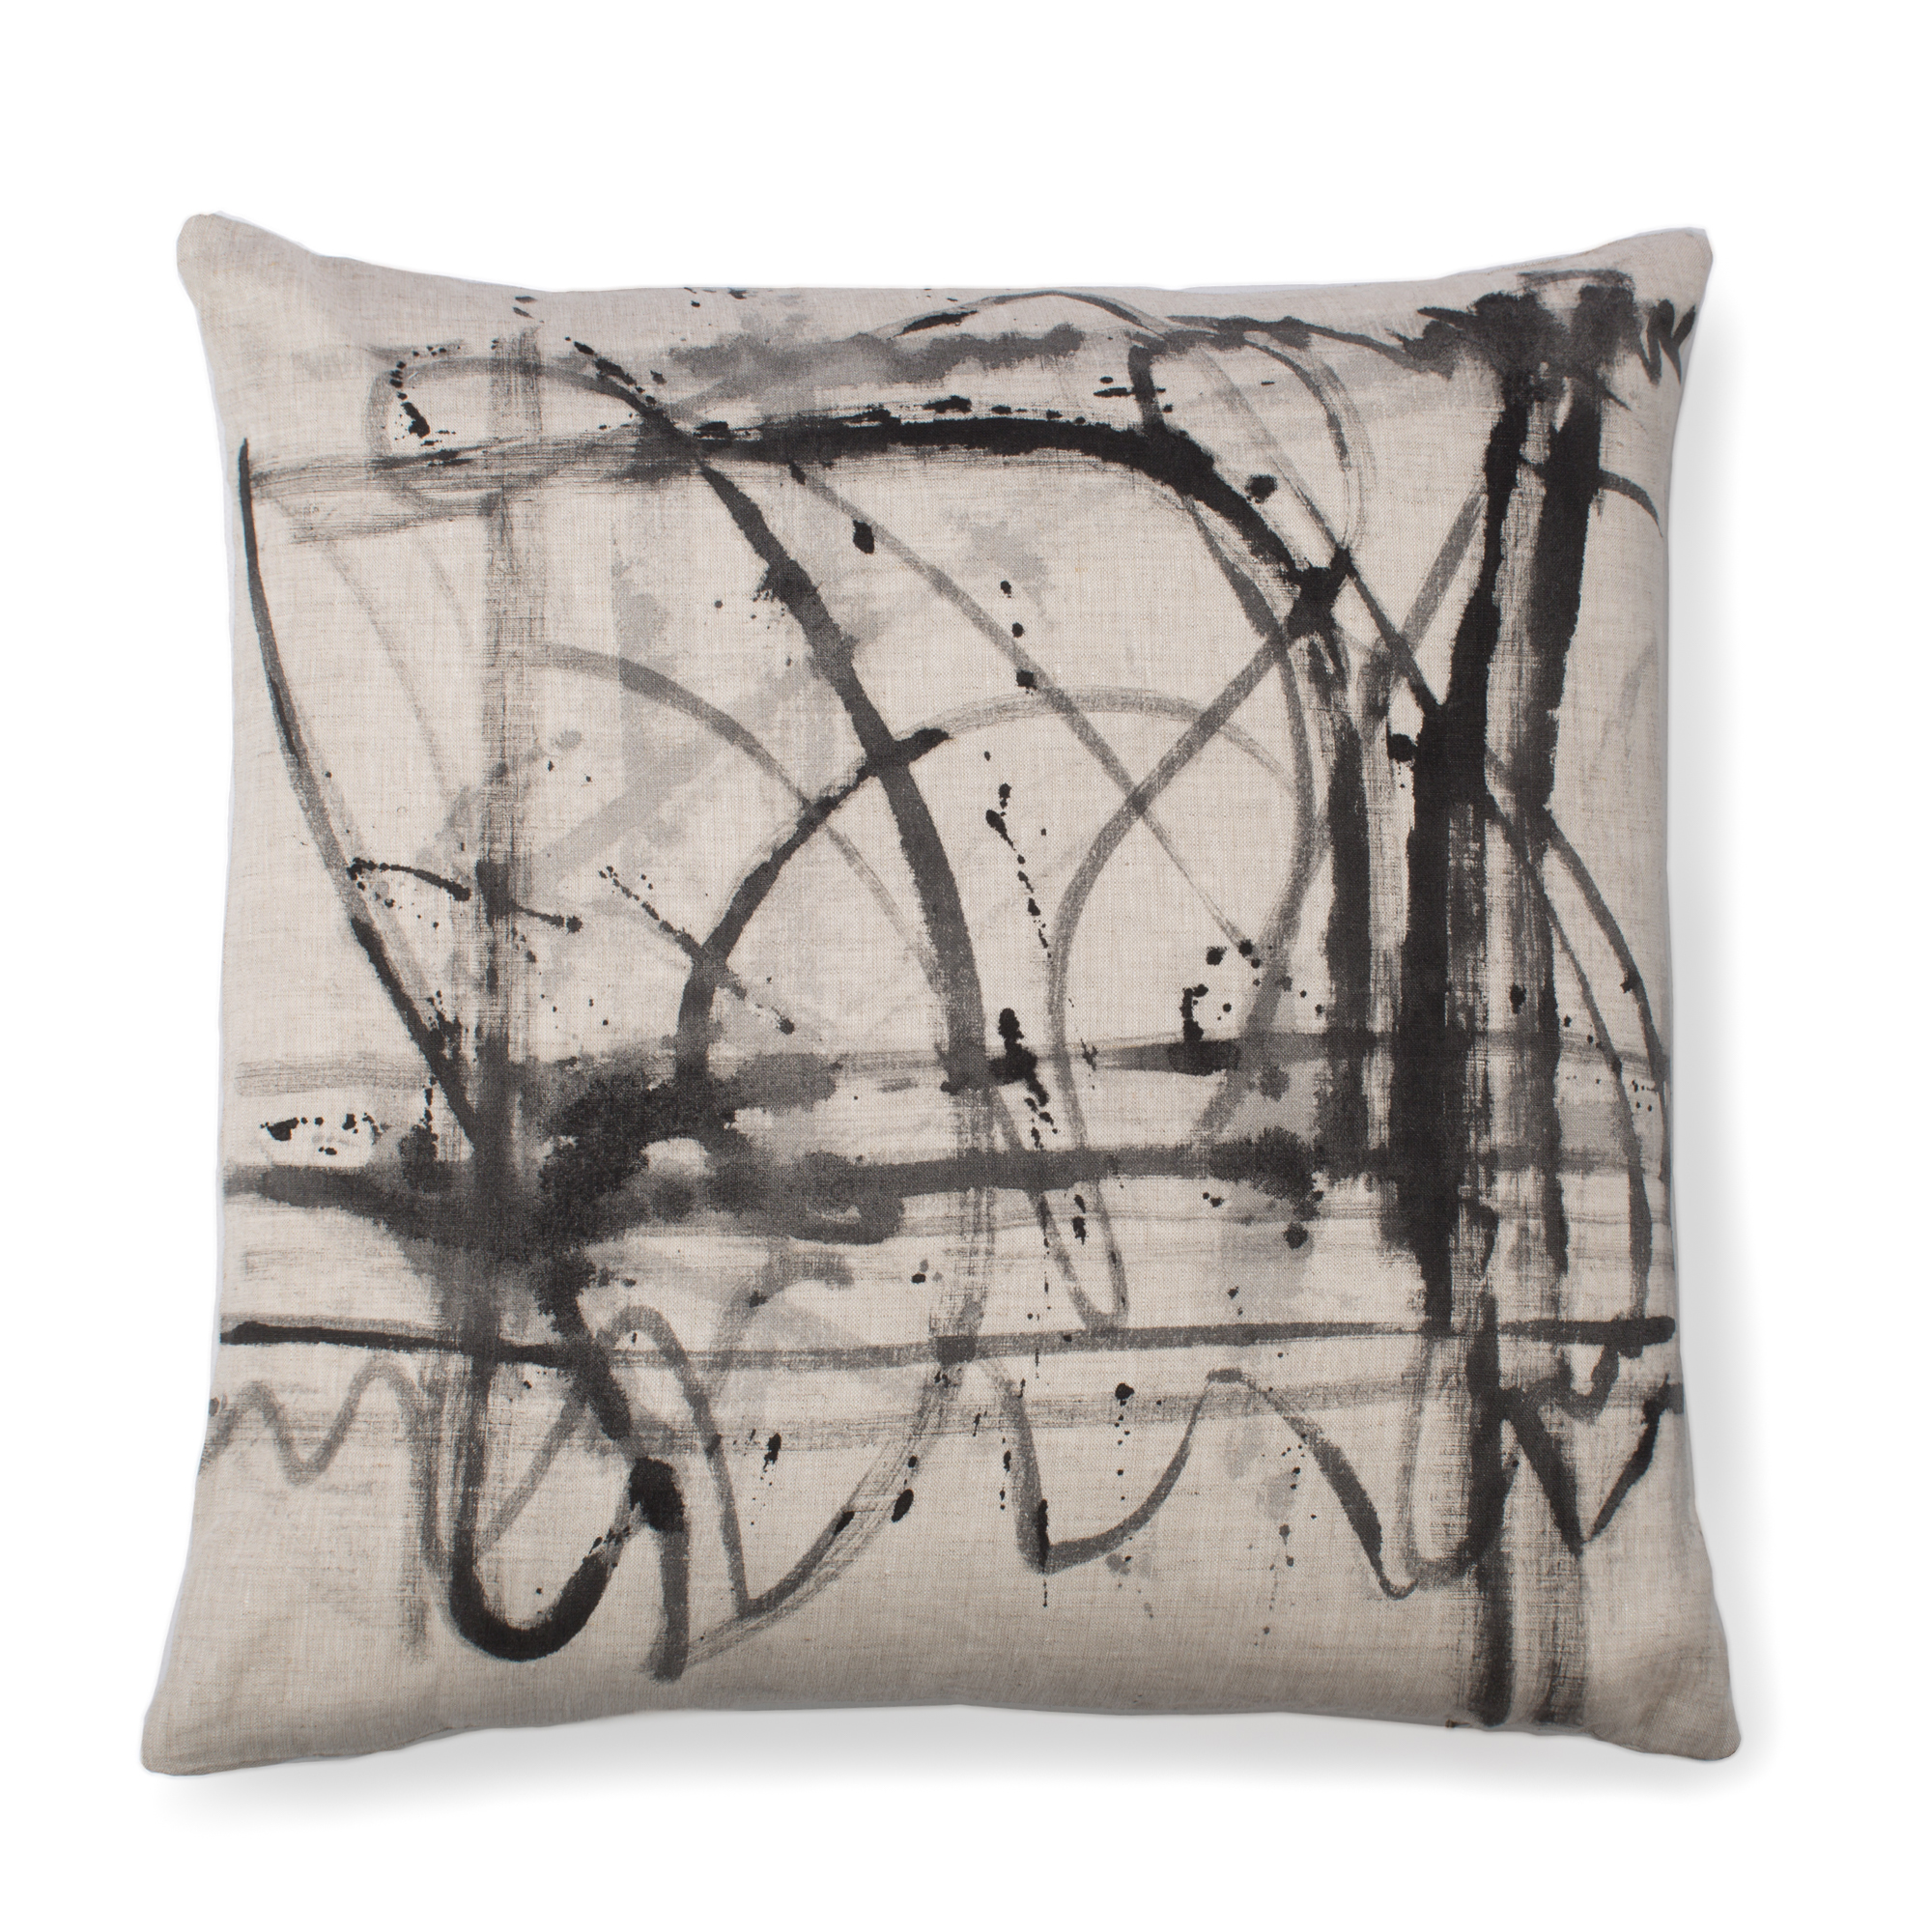 AbstractPillowFinished-9jpg.jpg